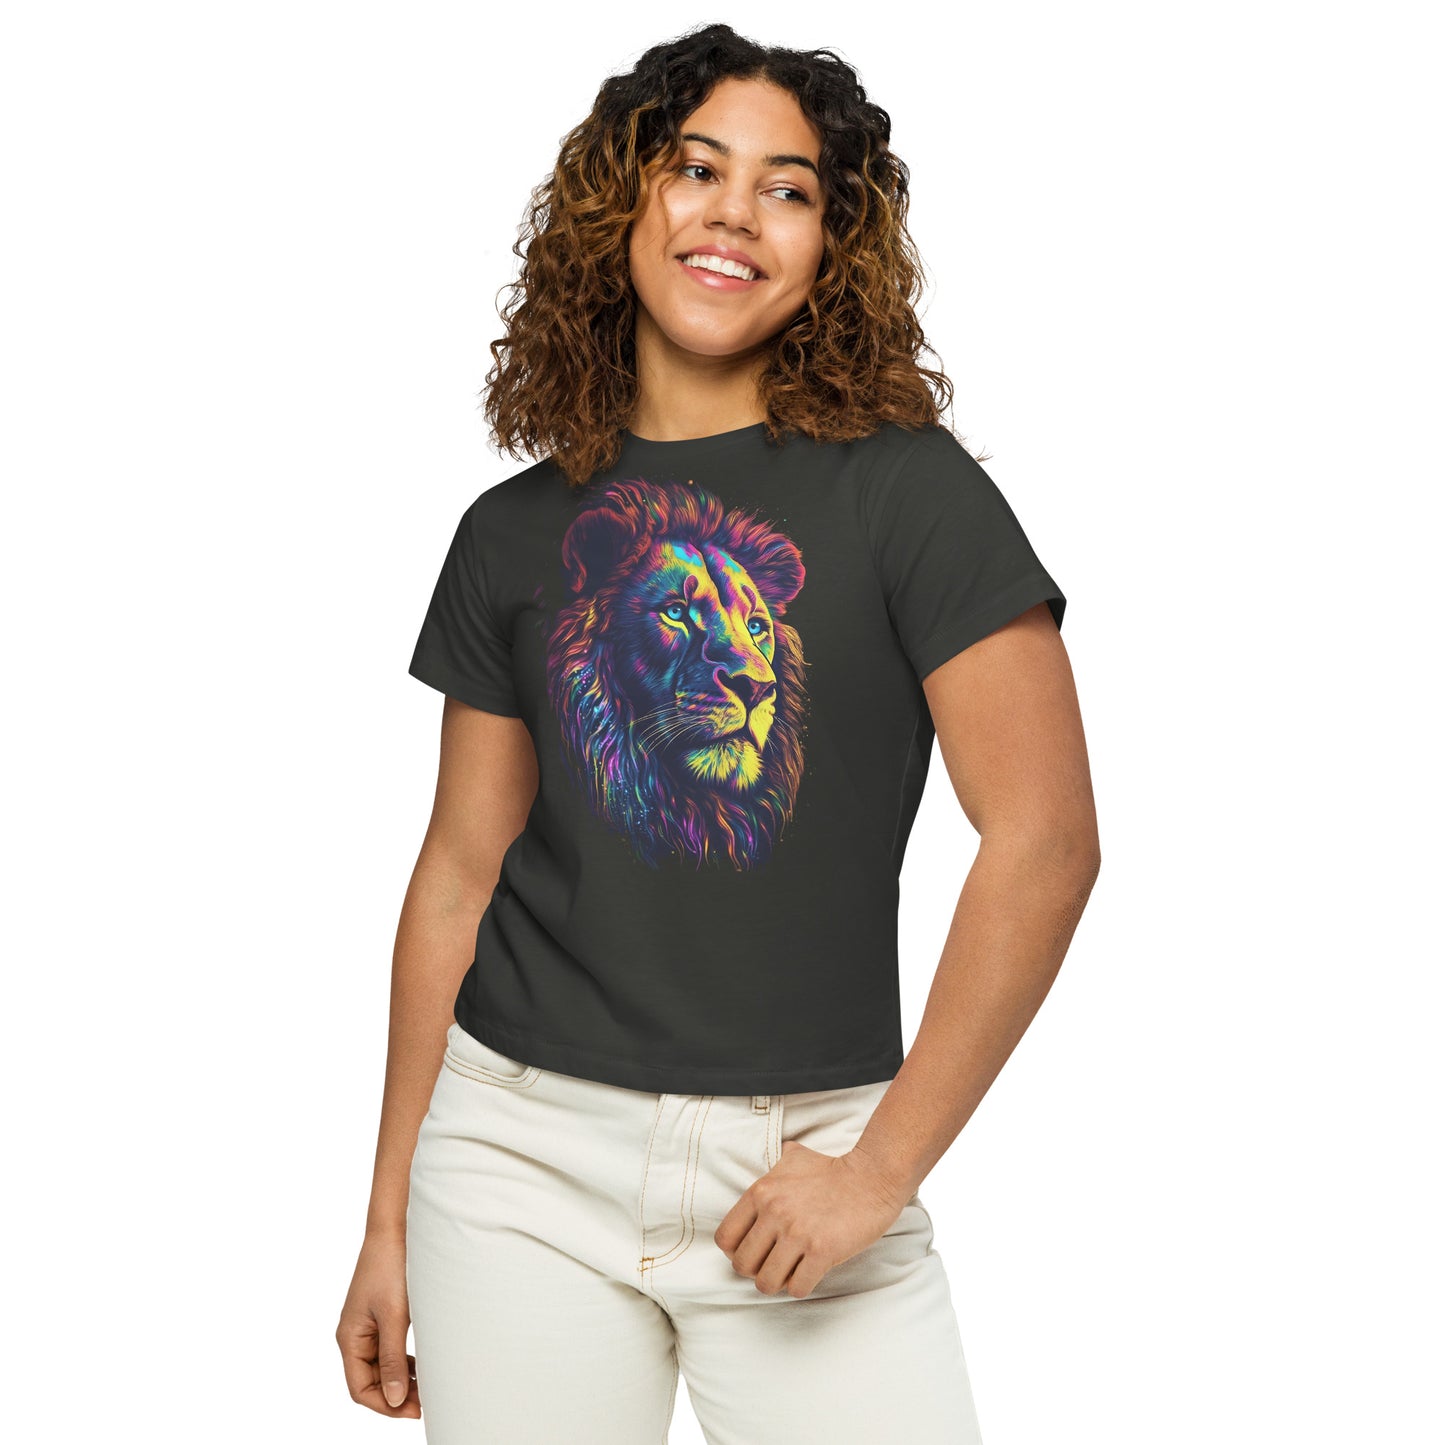 Women’s high-waisted t-shirt - Psychedelic, Lion, Retro, Neon Colors, Trippy